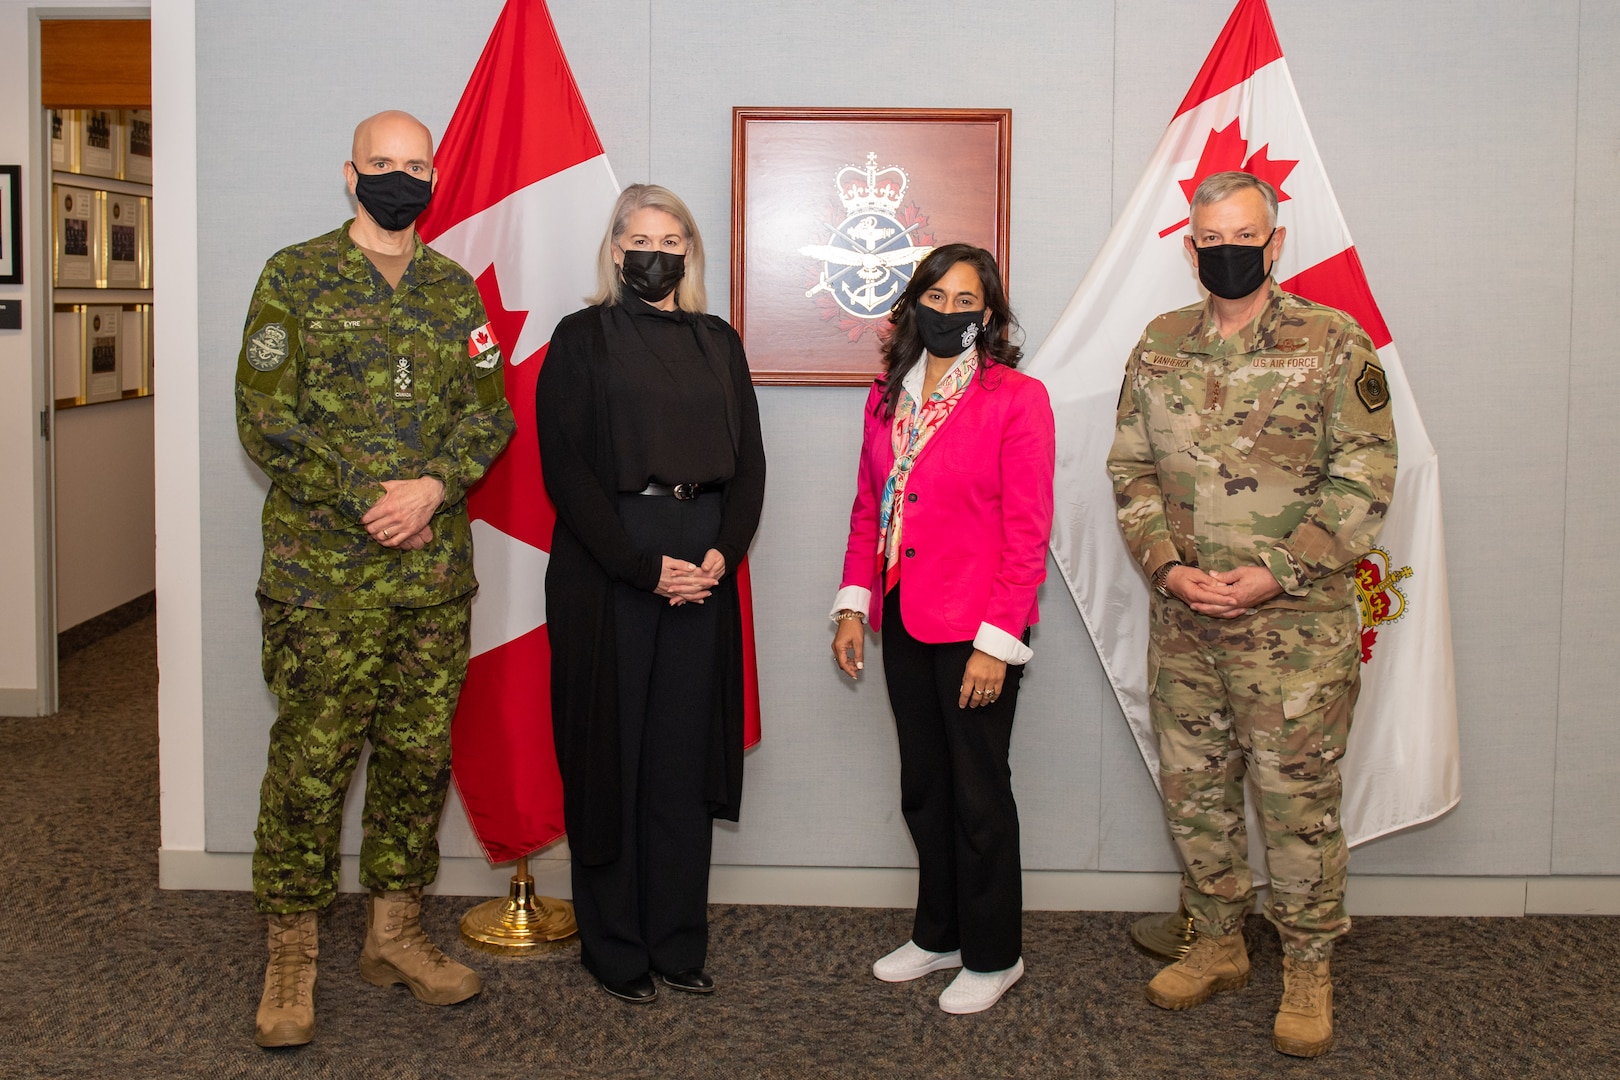 General Glen VanHerck, Commander, North American Aerospace Defense Command (NORAD) and United States Northern Command, visited National Defence Headquarters in Ottawa, on November 29 and 30.